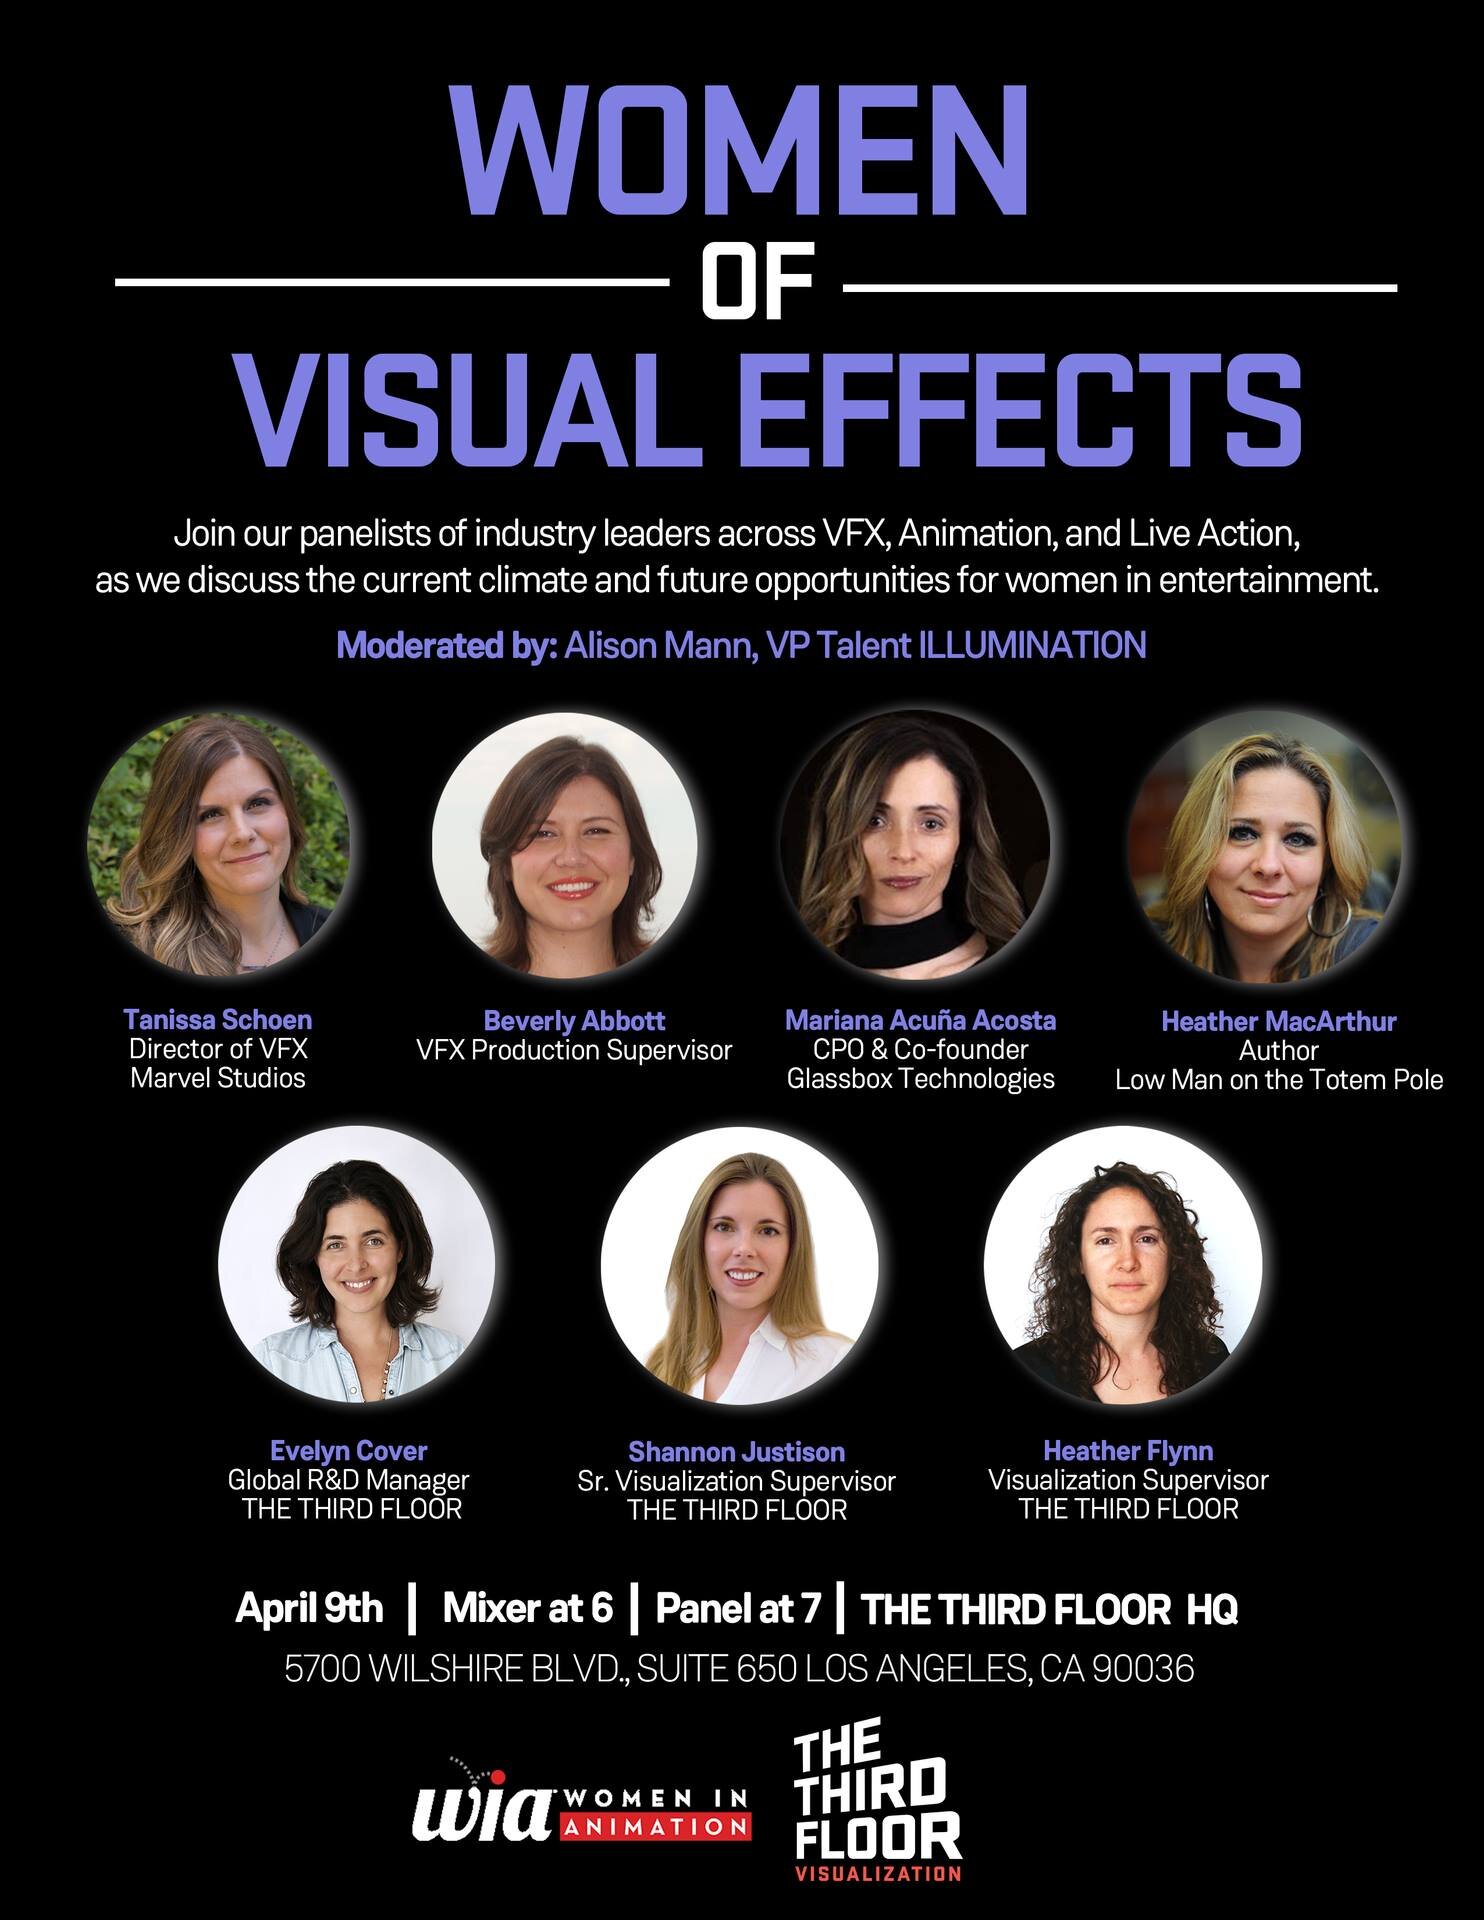 Women in Animation: Women of Visual Effects — The BRIC Foundation